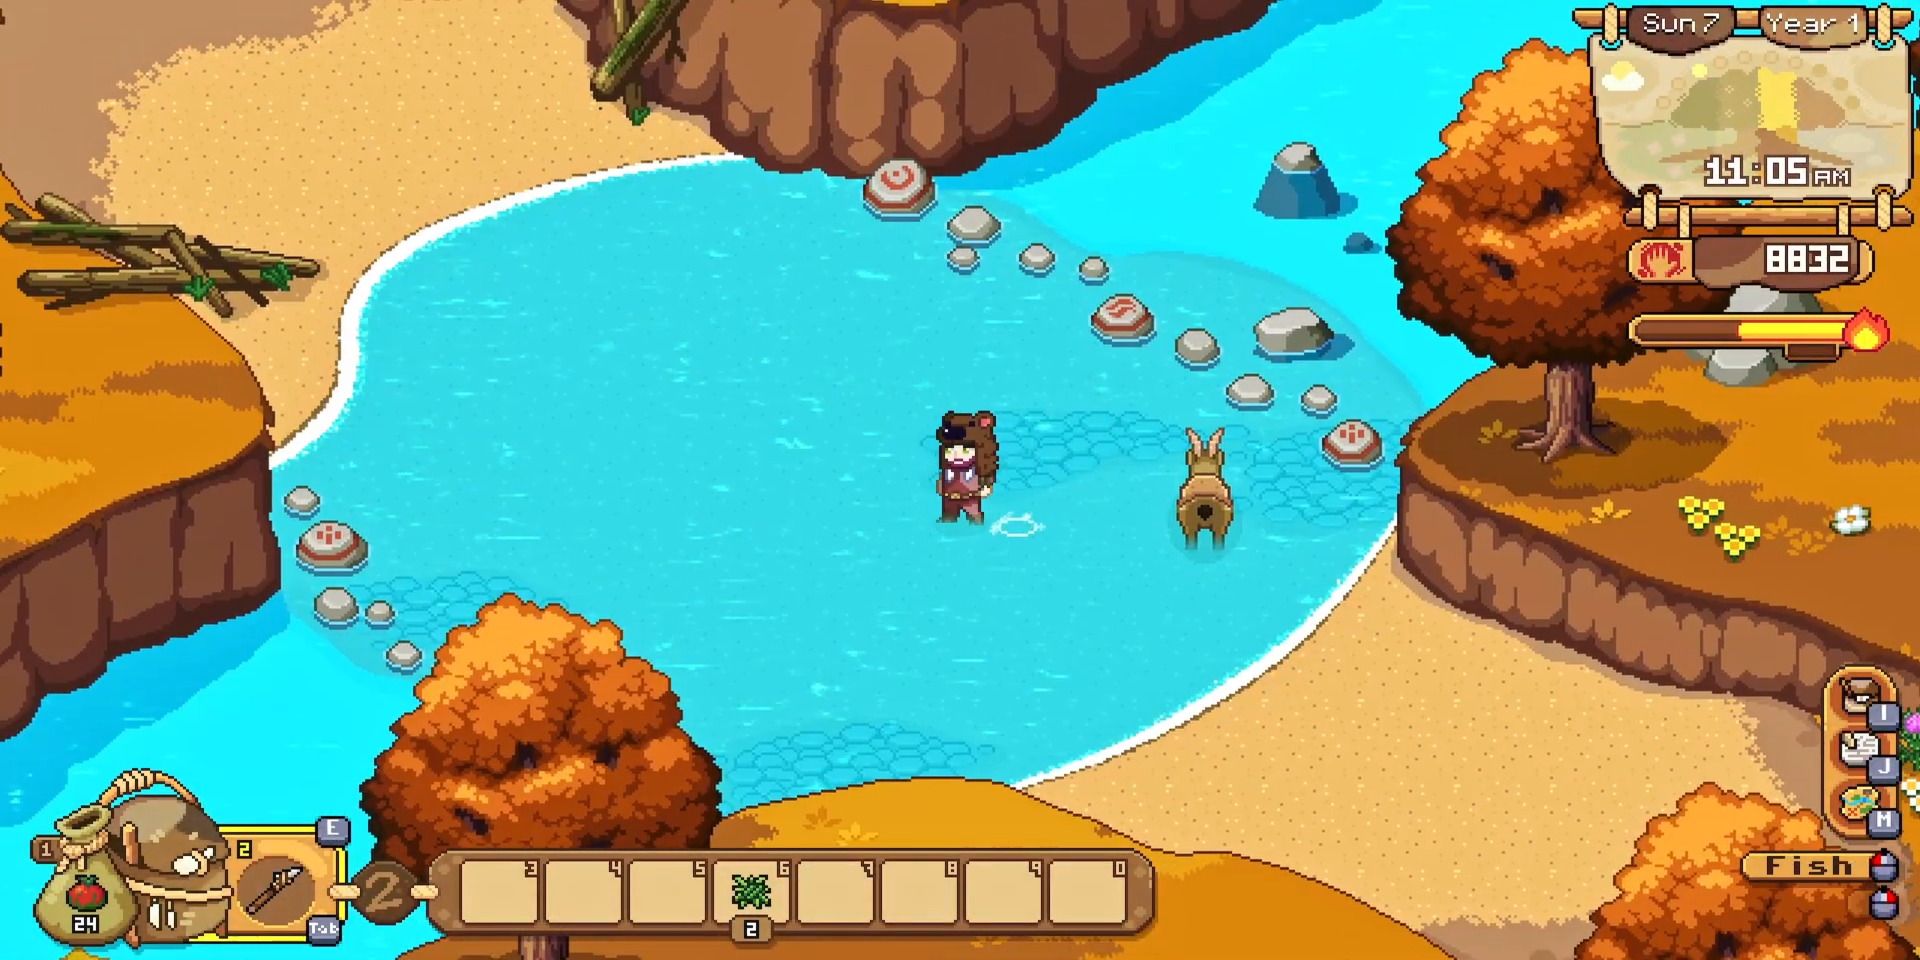 Fishing in the Savanna in Roots of Pacha